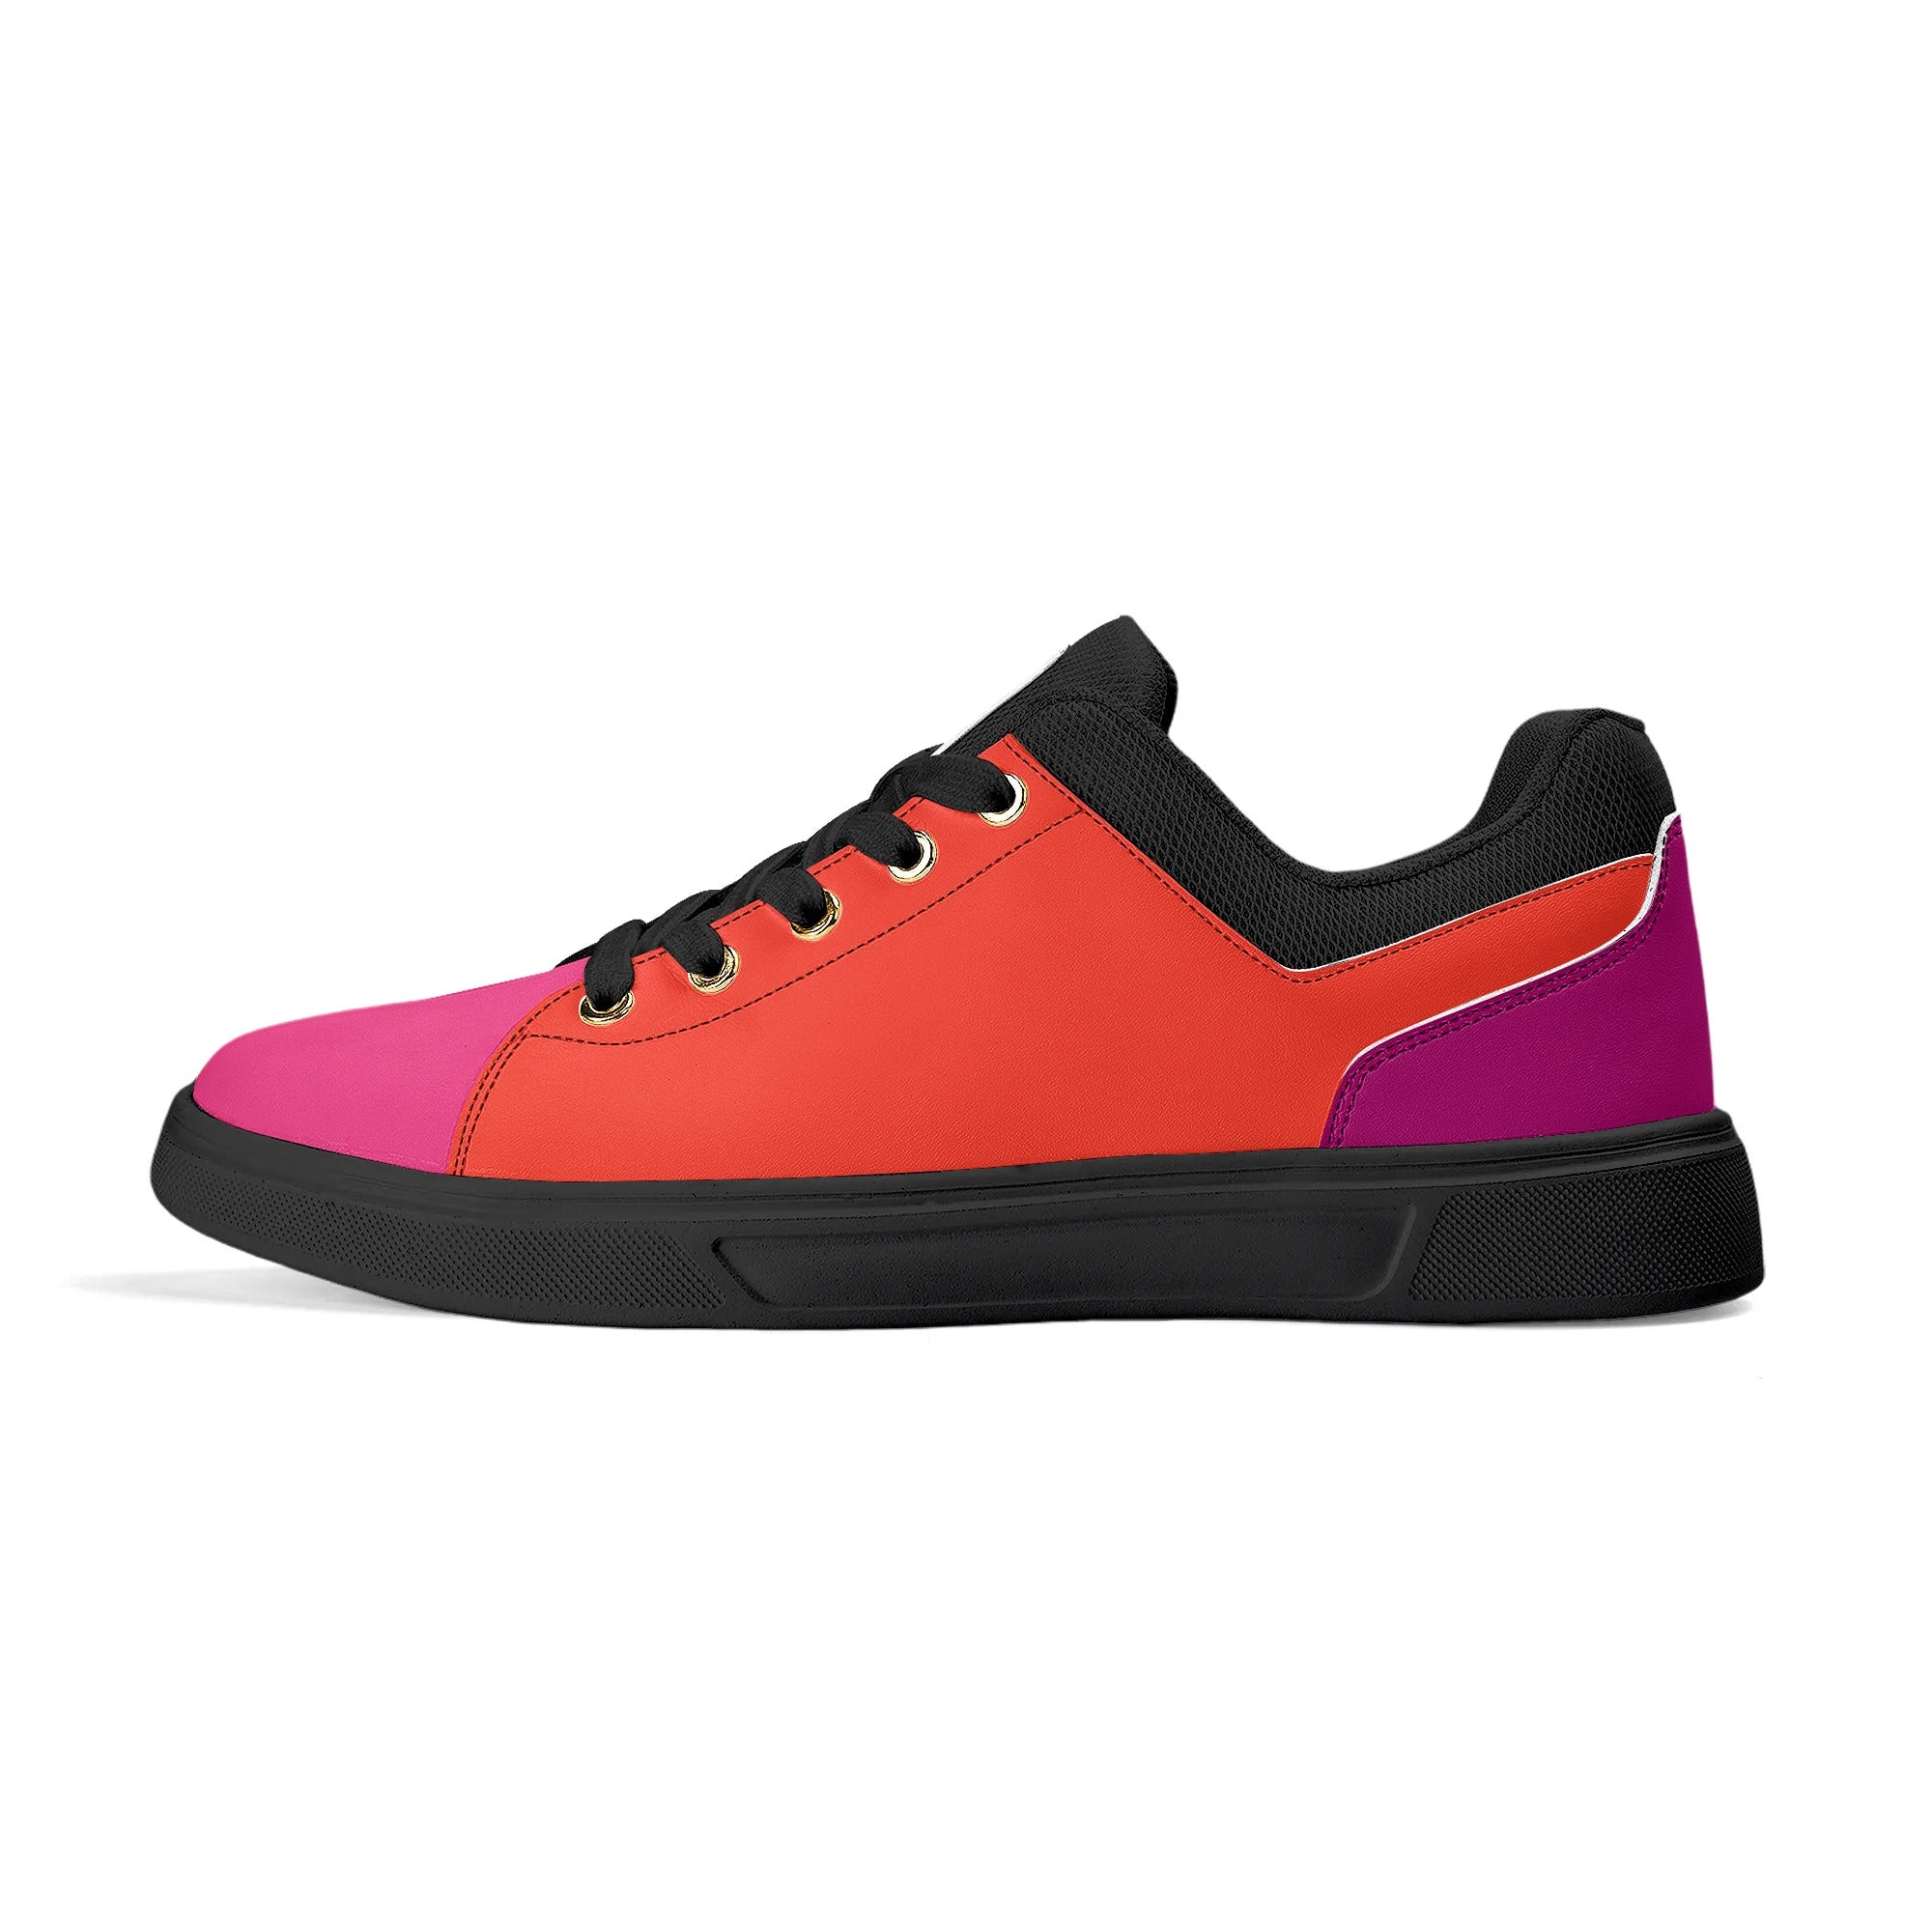 Color Block women's shoes Vegan Faux Leather Lightweight Pink Orange Brown Red  bold fashion Trendy urban sneakers street style blissfully brand